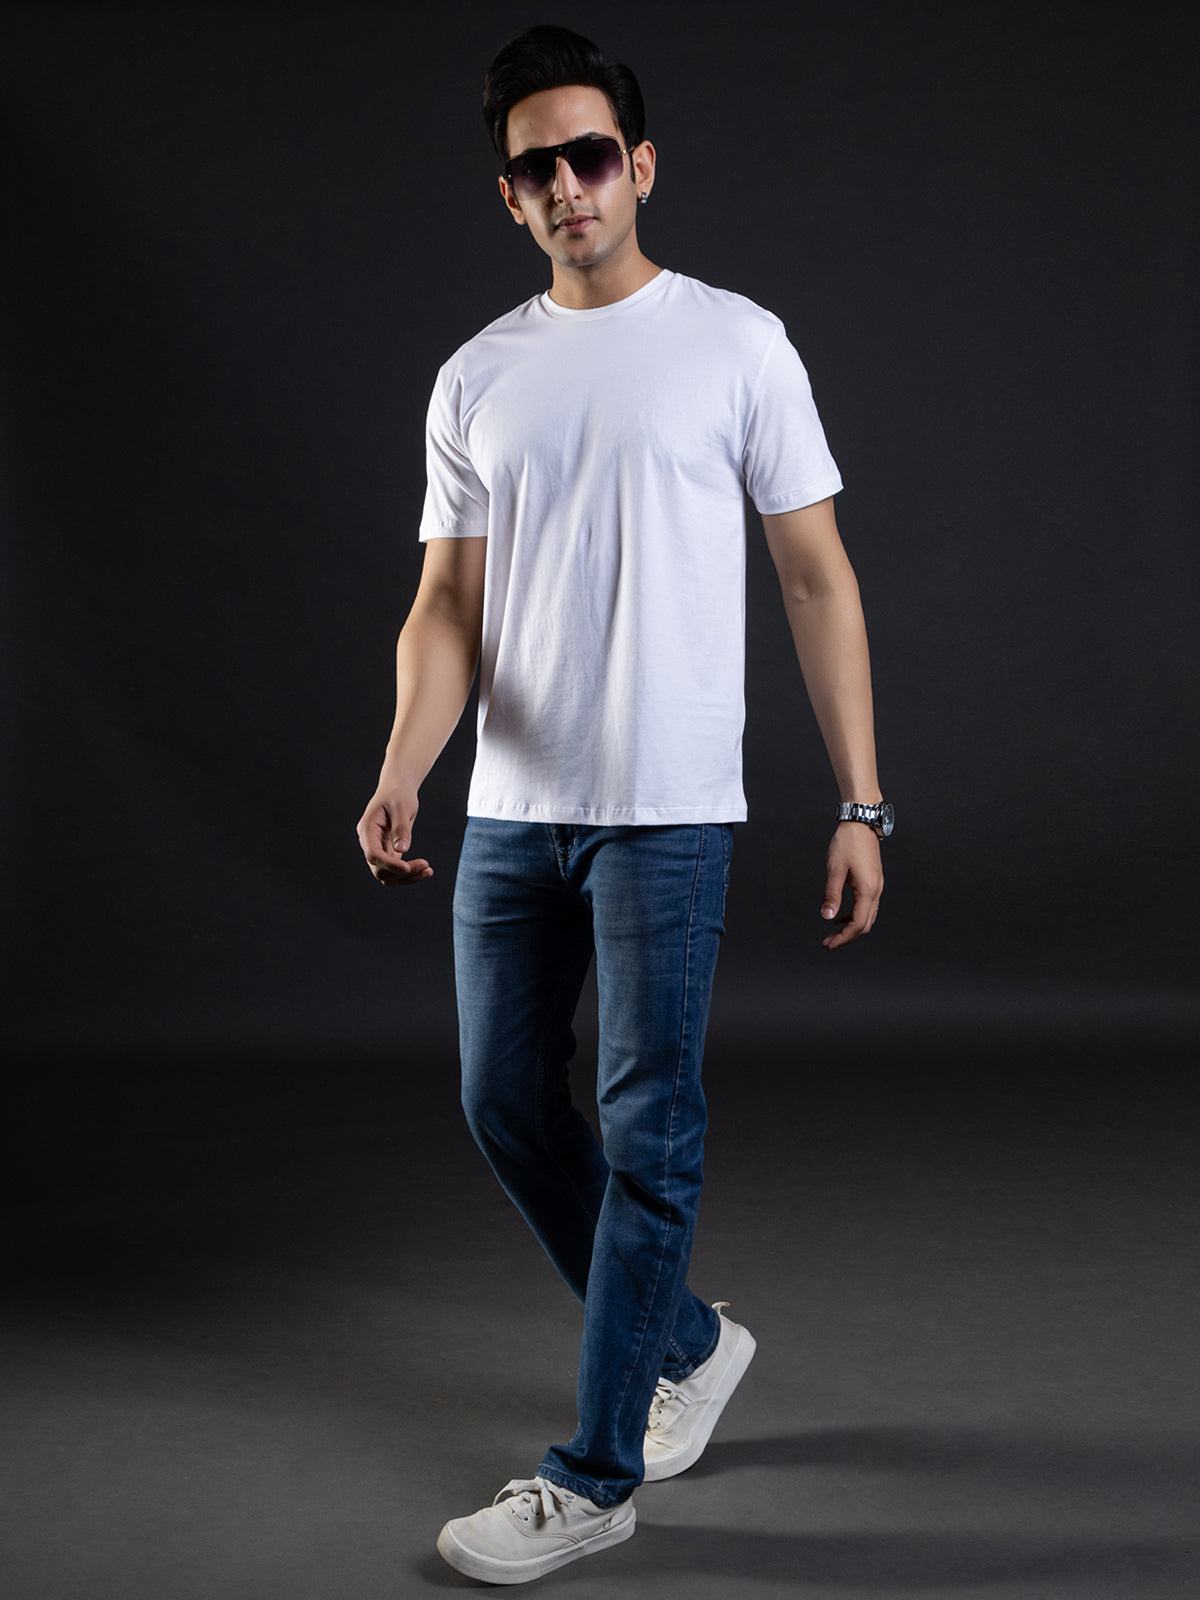 White  | ACTION series | Sports t shirt for Men